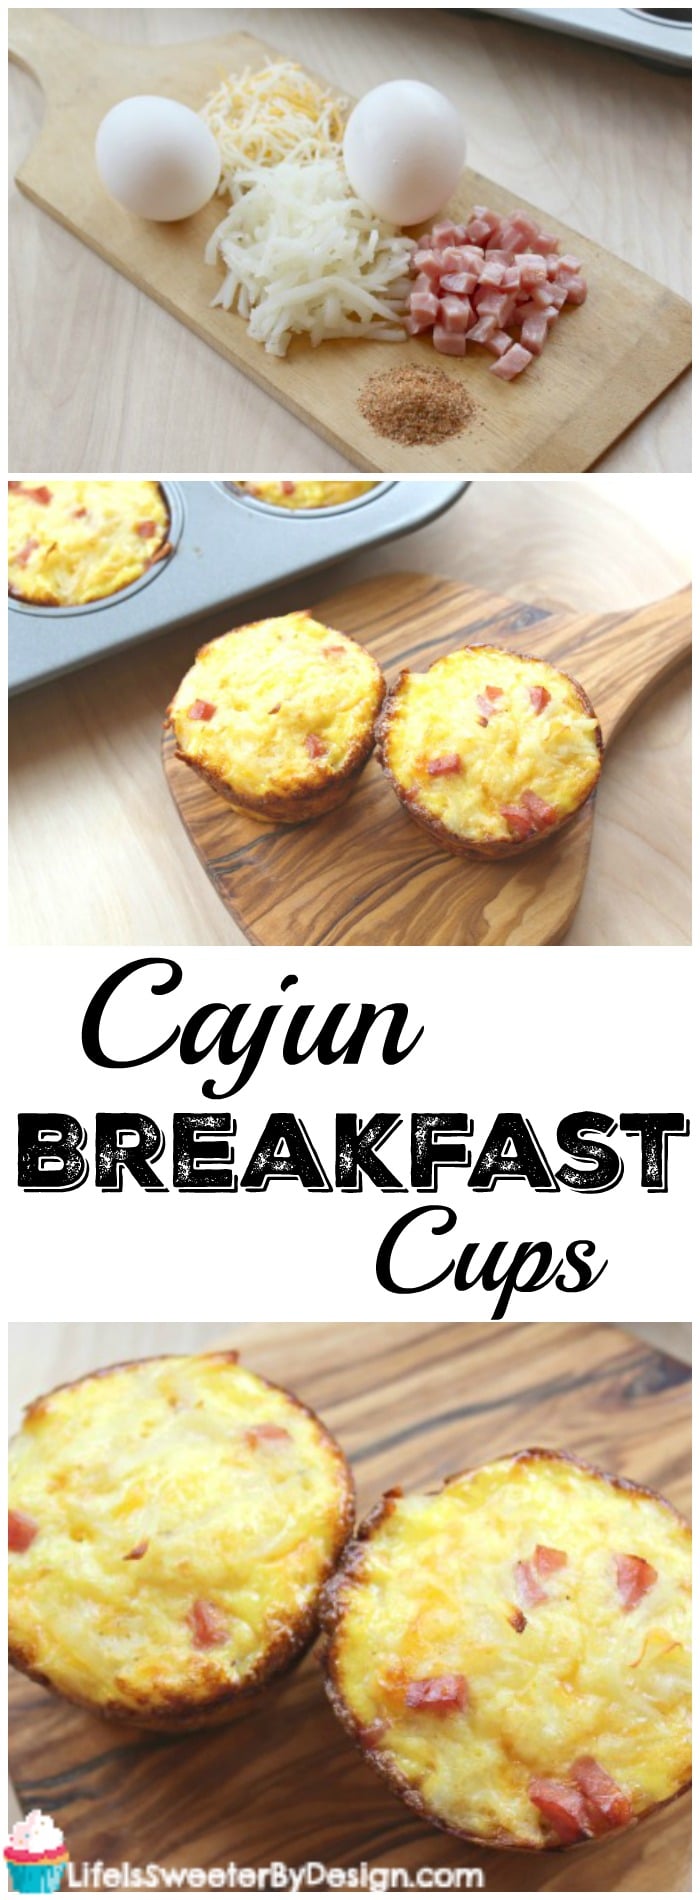 Cajun Breakfast Cups have only 5 ingredients and are packed with protein and flavor! This simple breakfast recipe will be a huge hit! #ad #ScrubMyWay #TeamSponge